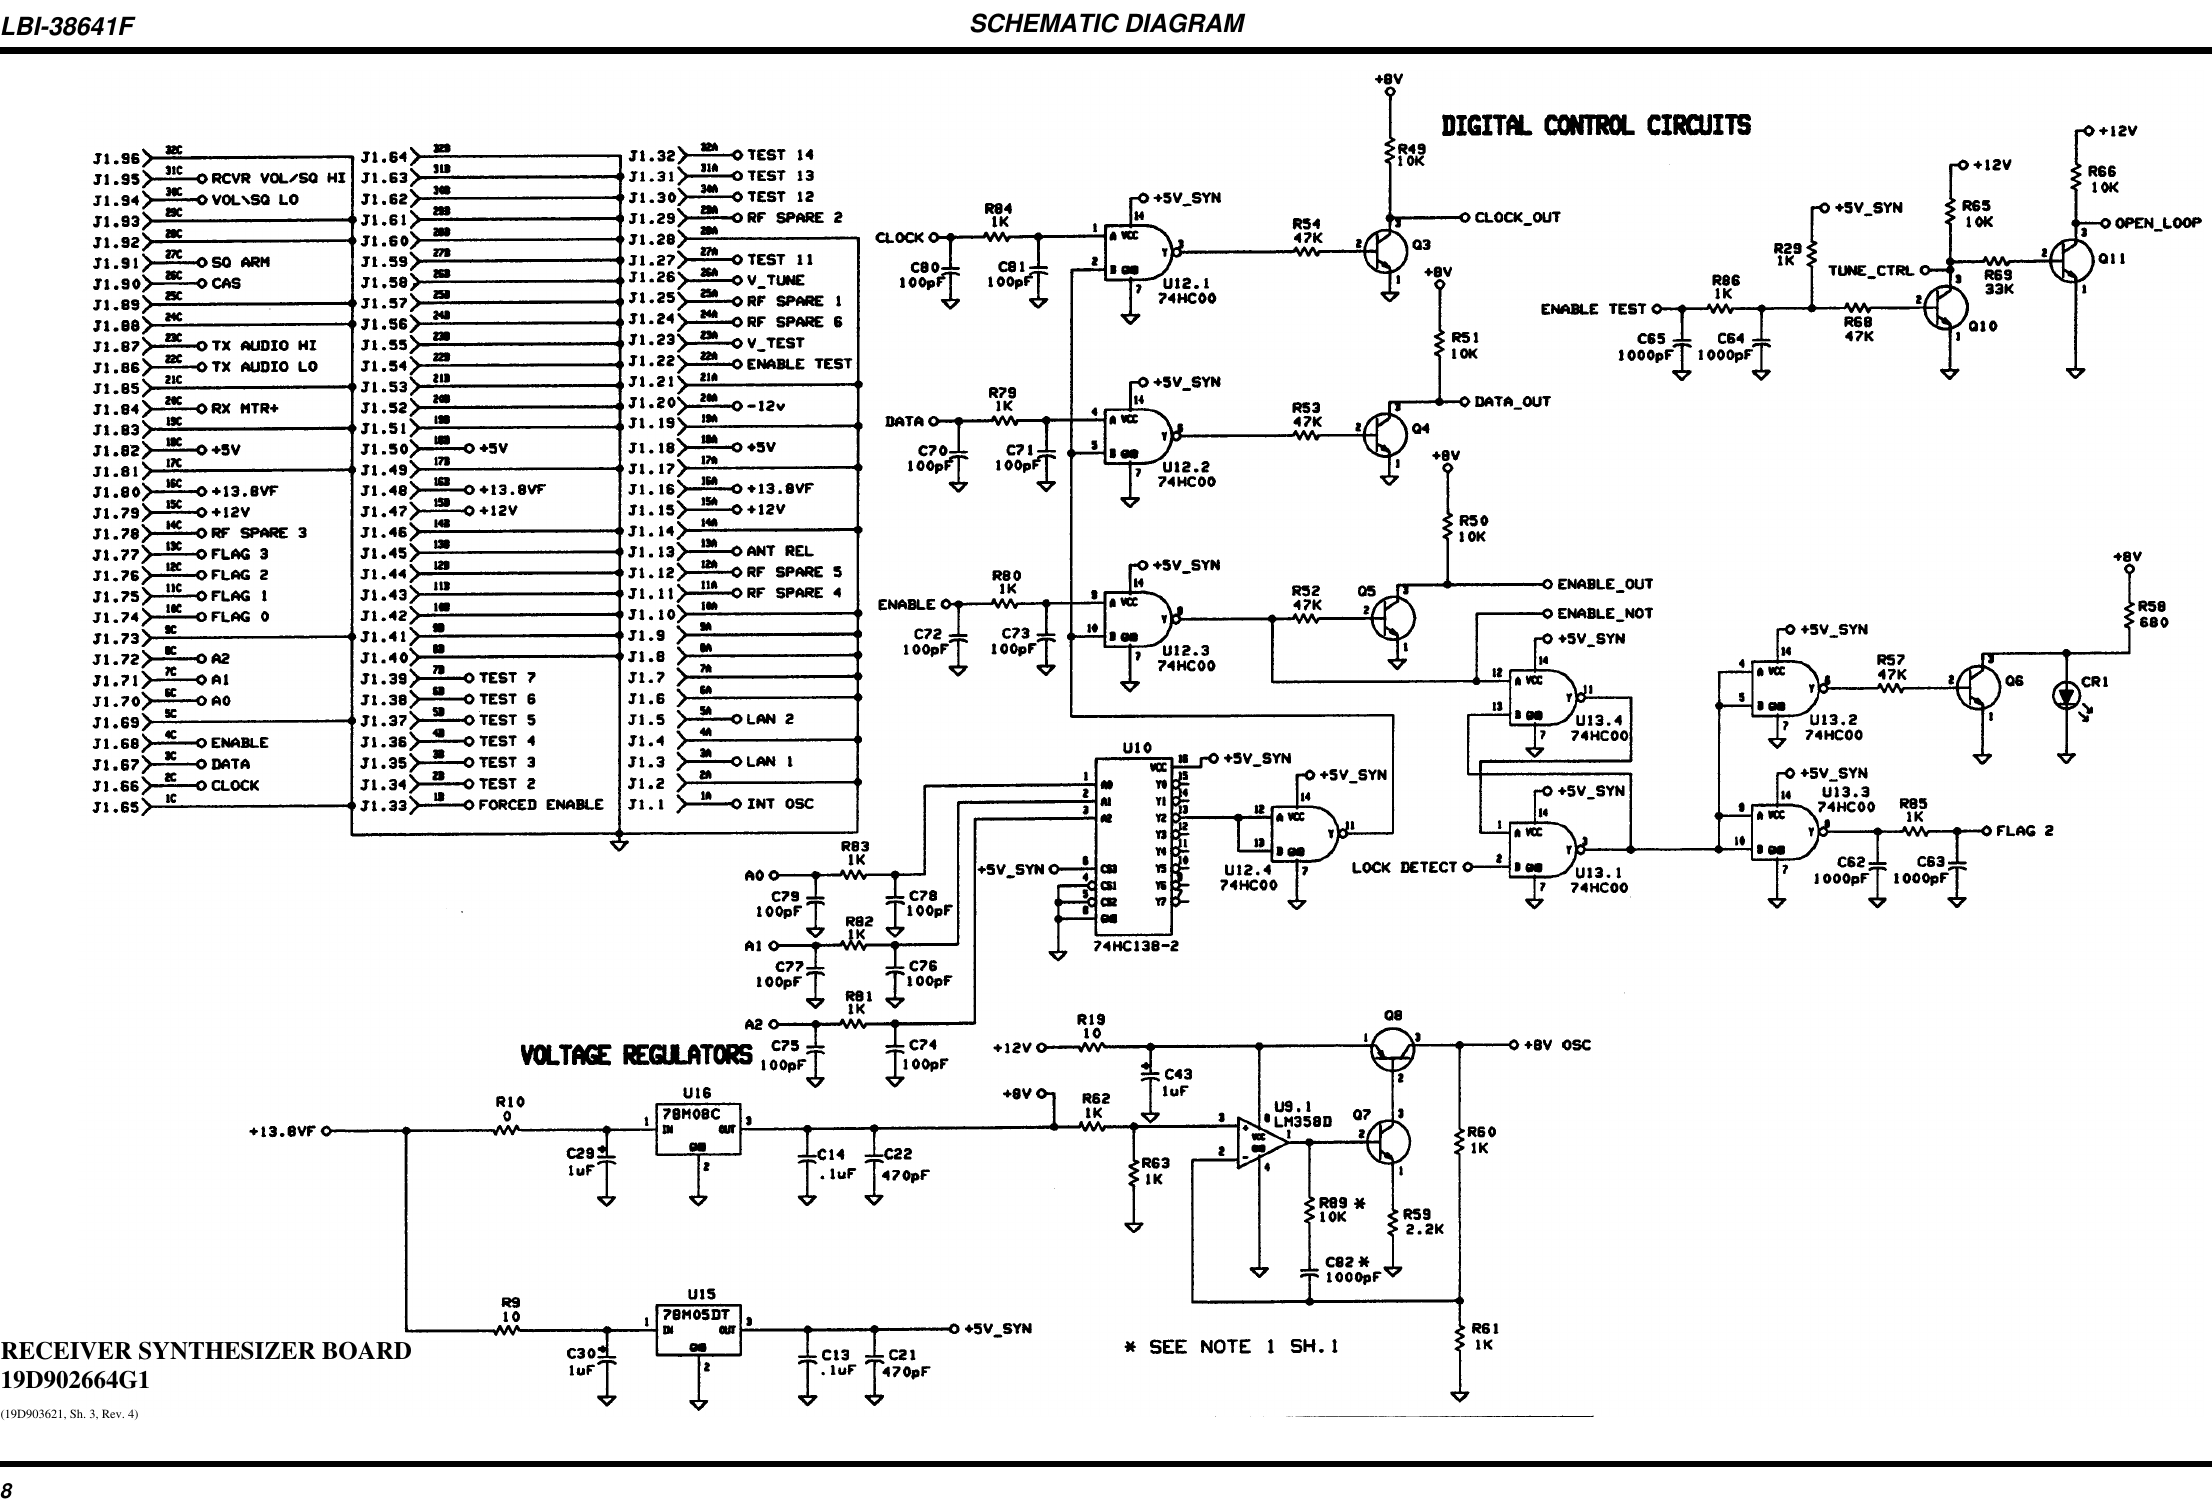 SCHEMATIC DIAGRAMRECEIVER SYNTHESIZER BOARD19D902664G1(19D903621, Sh. 3, Rev. 4)LBI-38641F8